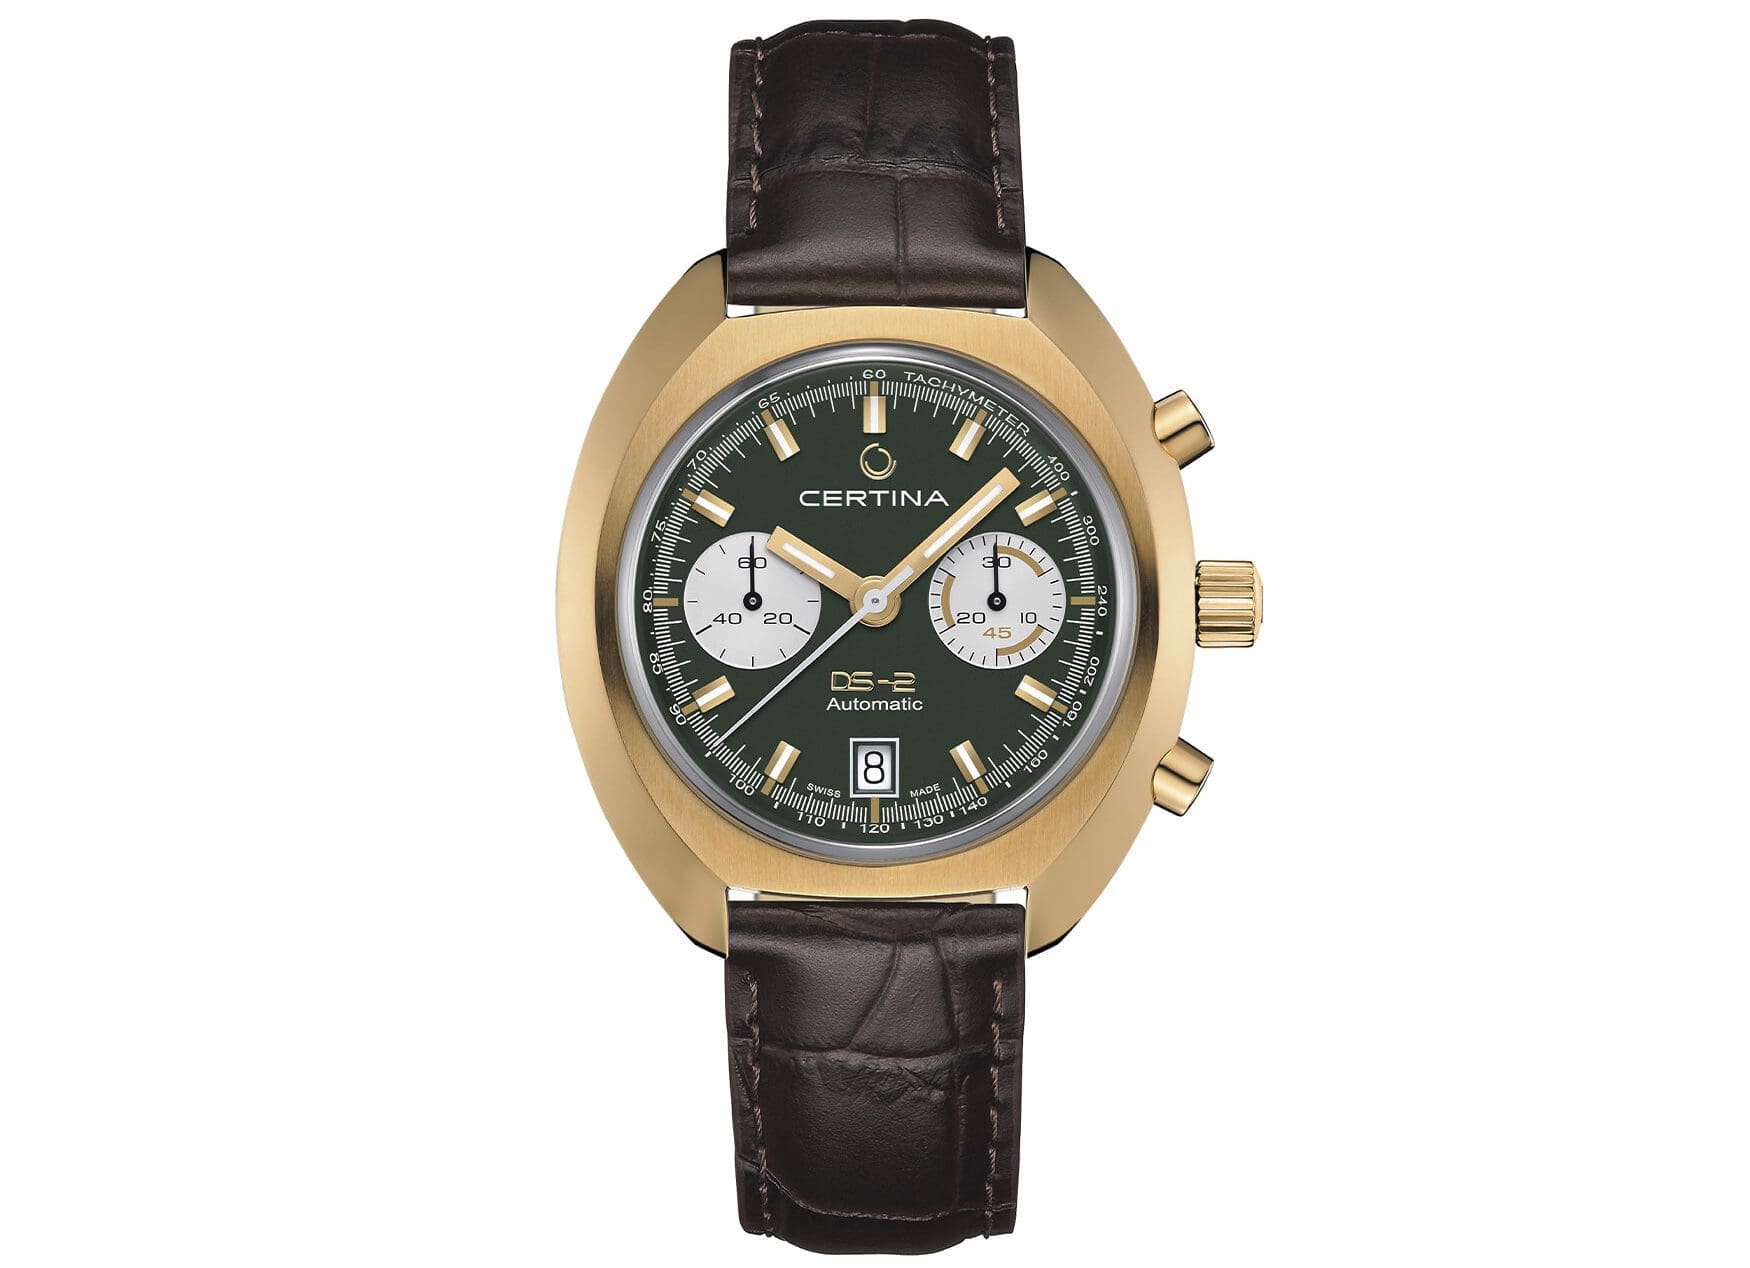 Certina DS-2 Chronograph Automatic gold